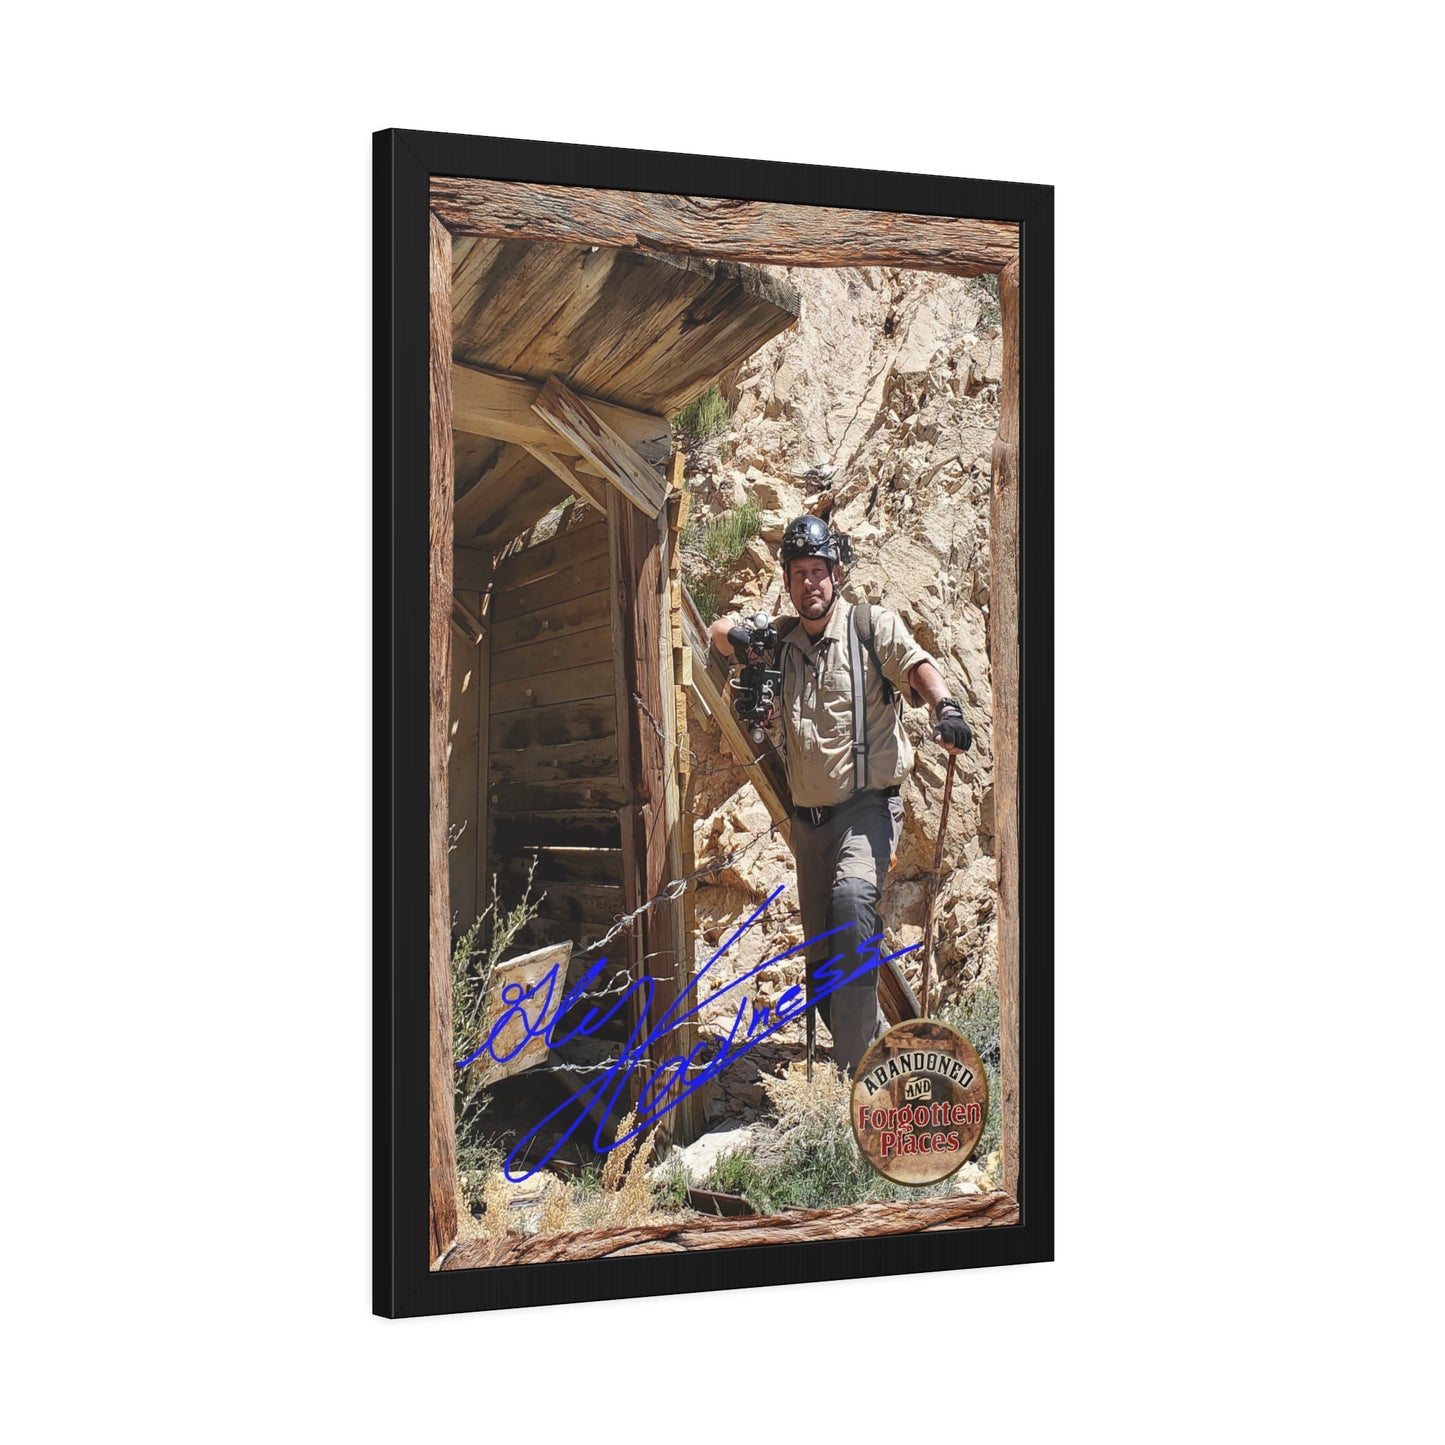 Gly Coolness Signature Collection, The Soaring Eagle Mine, Episode 54 (Pinewood Framed)